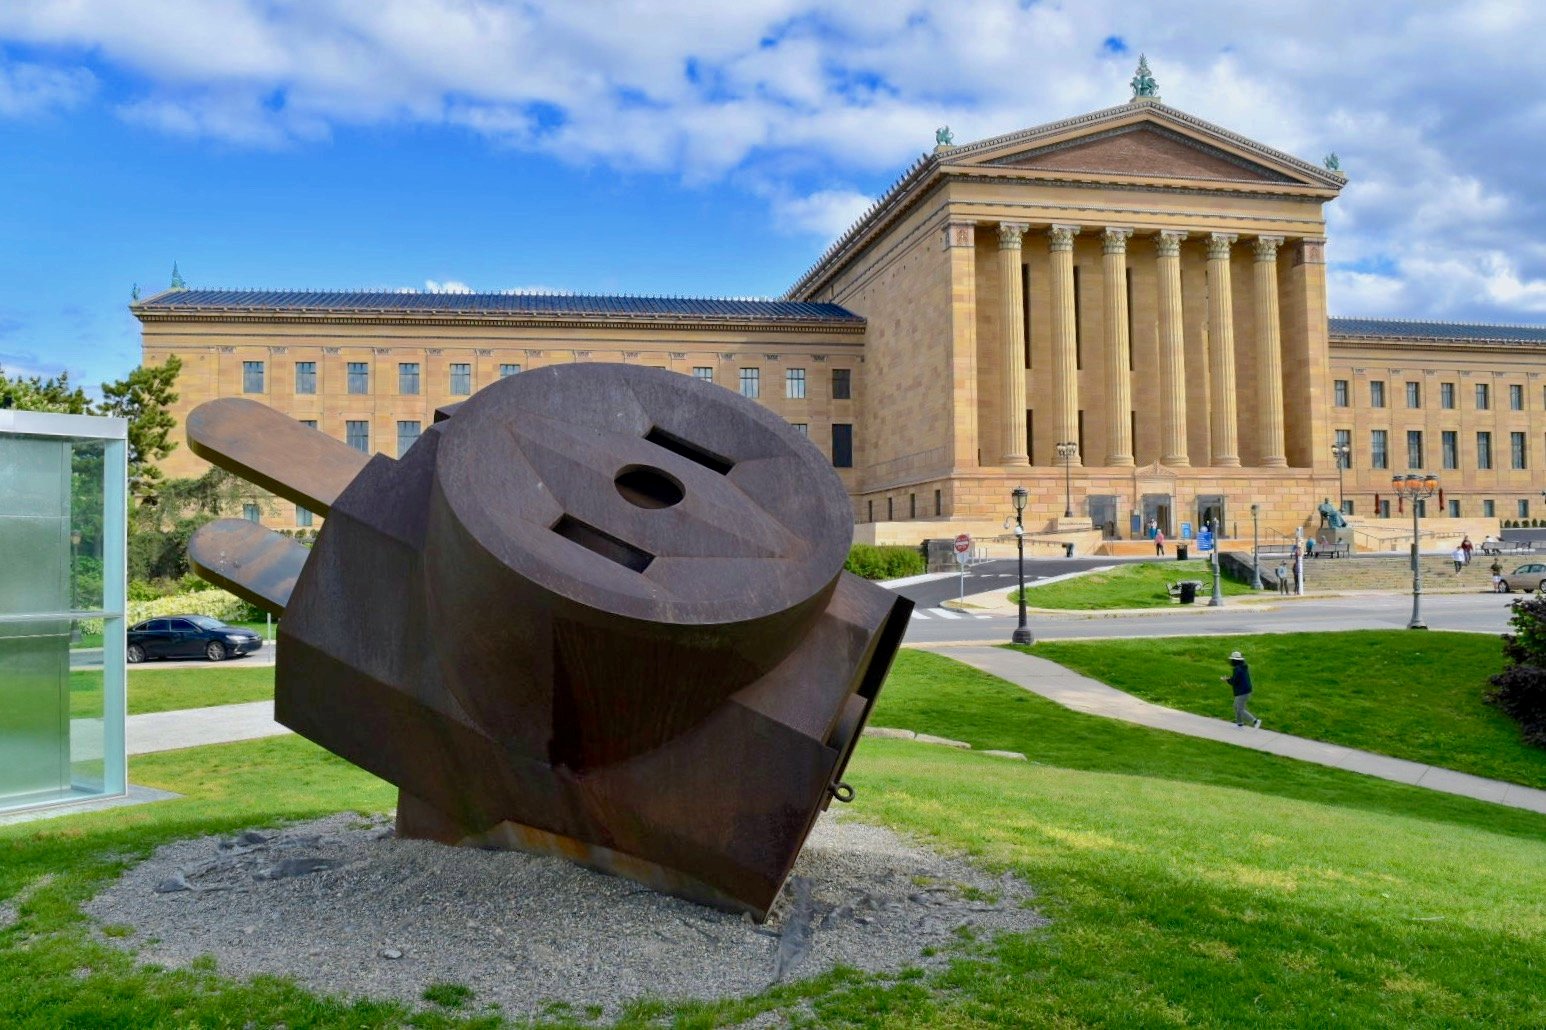 See how superstar architect Frank Gehry reimagined the Philadelphia Museum of Art with a brand-new $233 million expansion